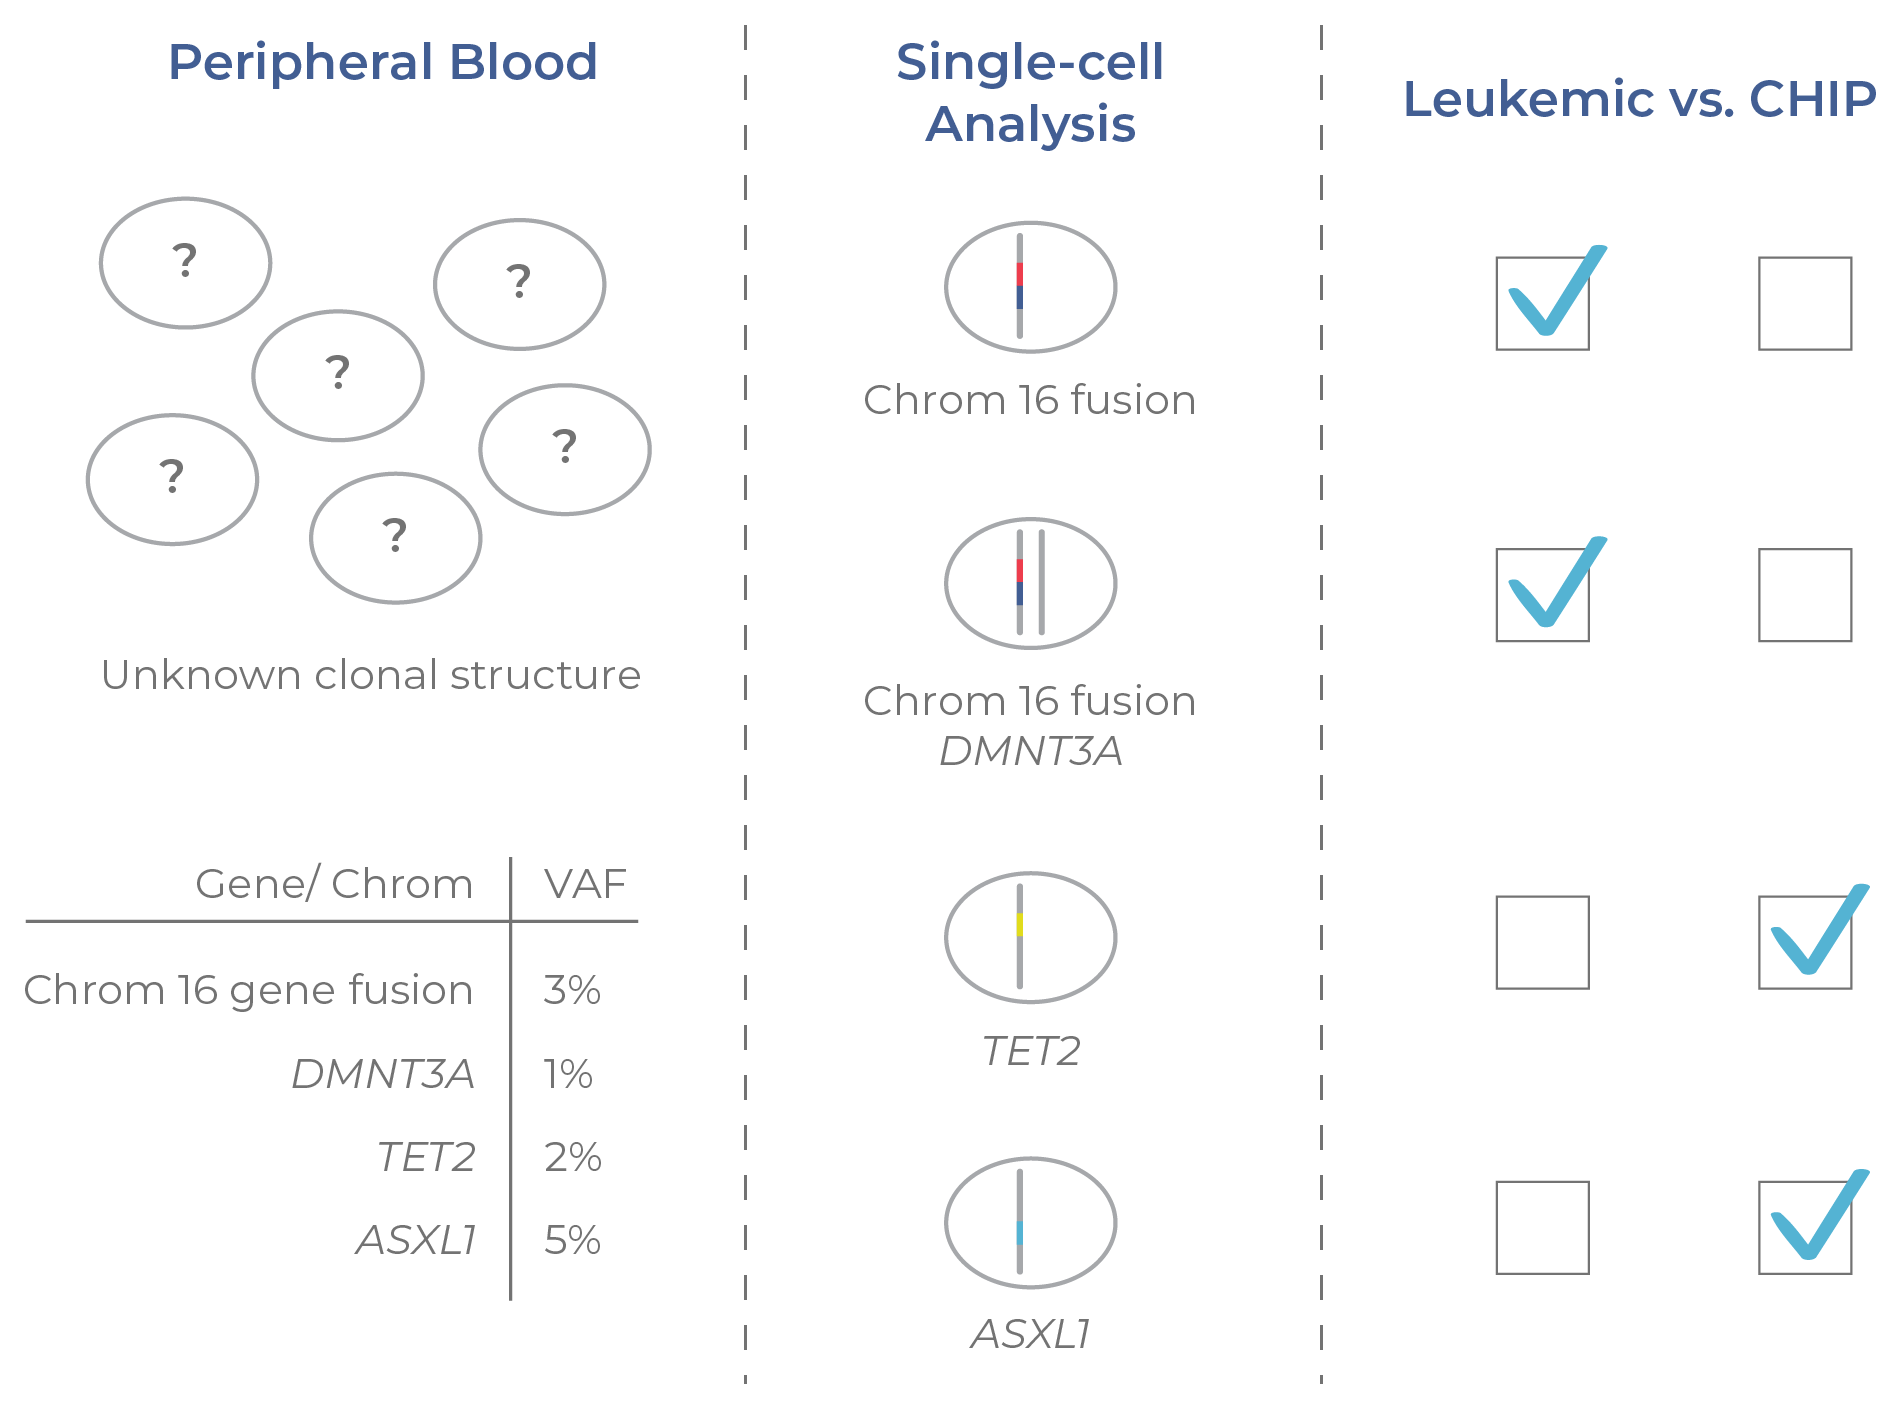 Figure 15. Single-cell analysis distinguishes CHIP clones.